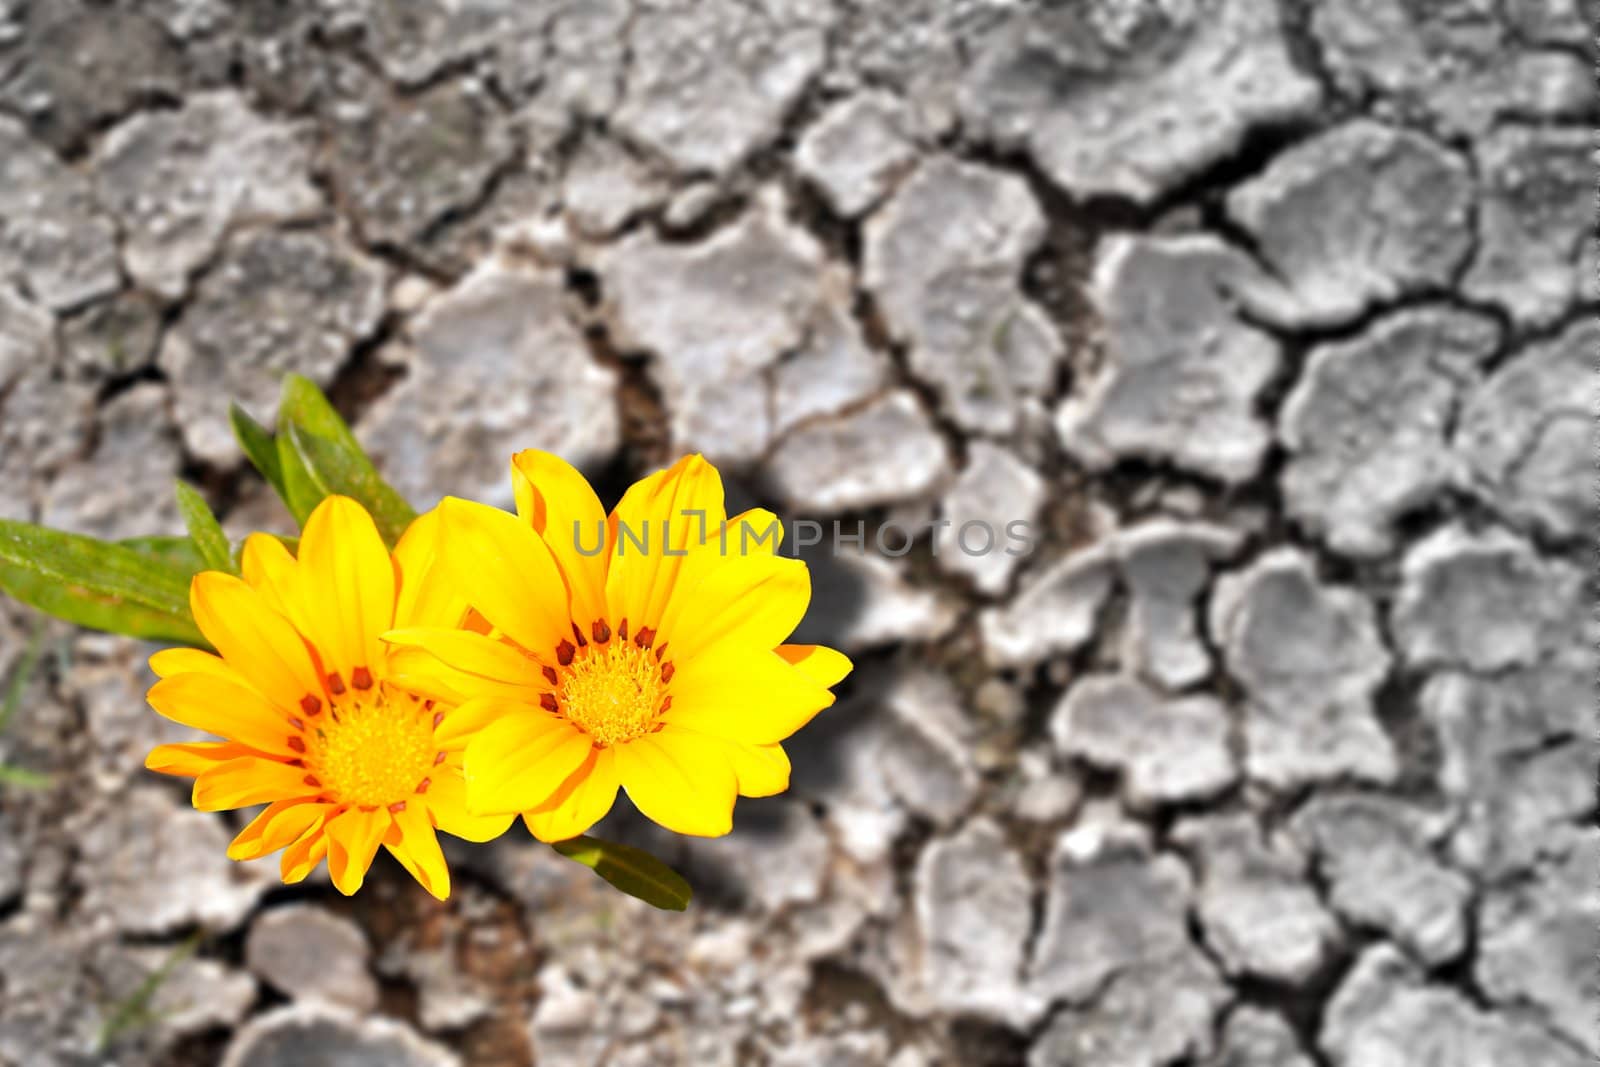 Concept of persistence. Flowers blooming in arid land by mnsanthoshkumar